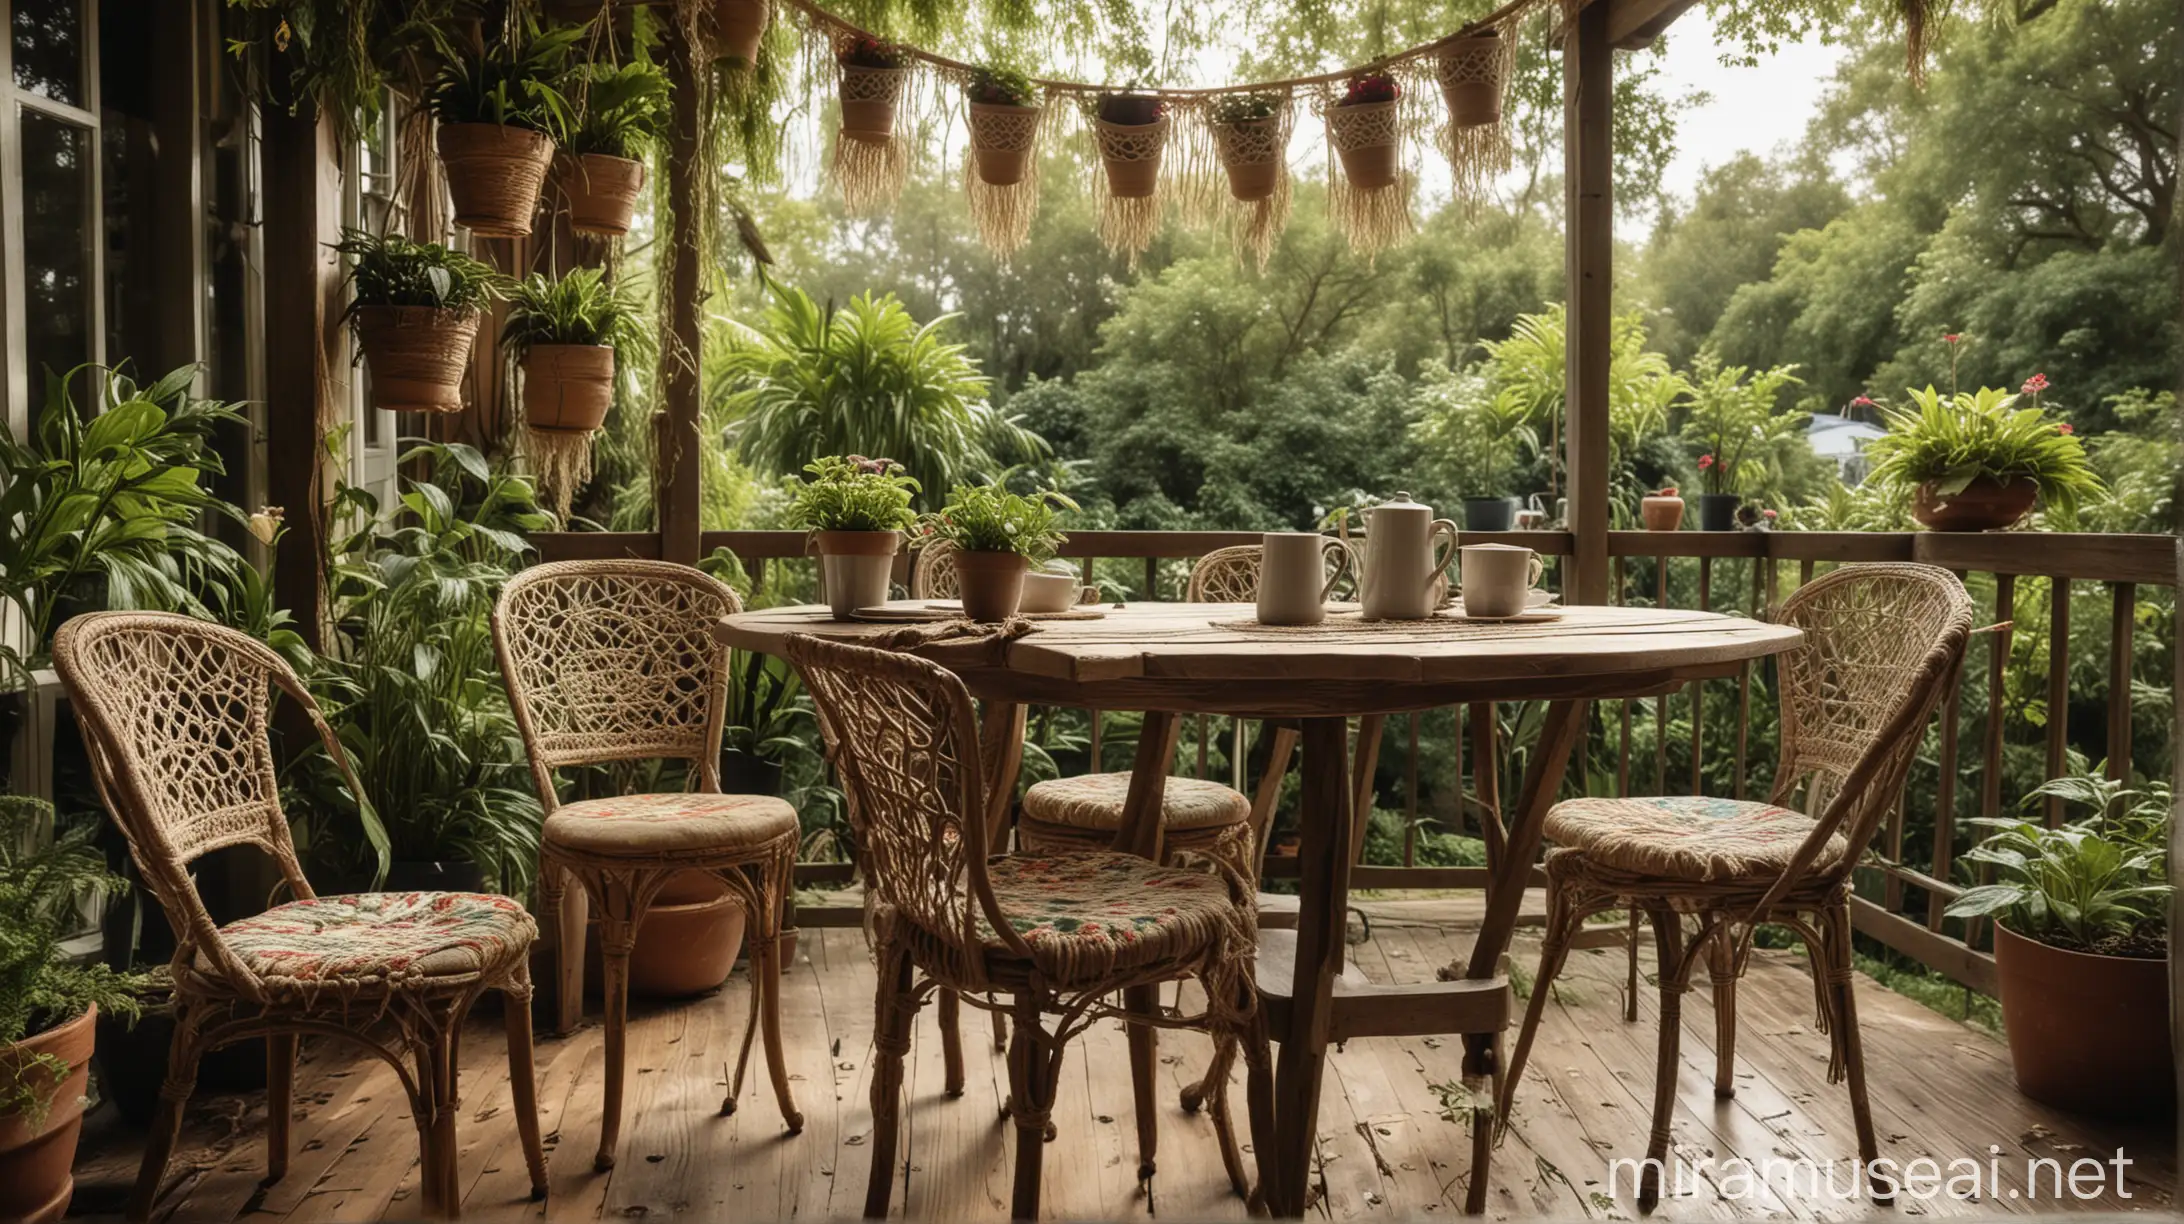 Cozy Outdoor Coffee Nook with Vintage Decor and Sunlit Ambiance